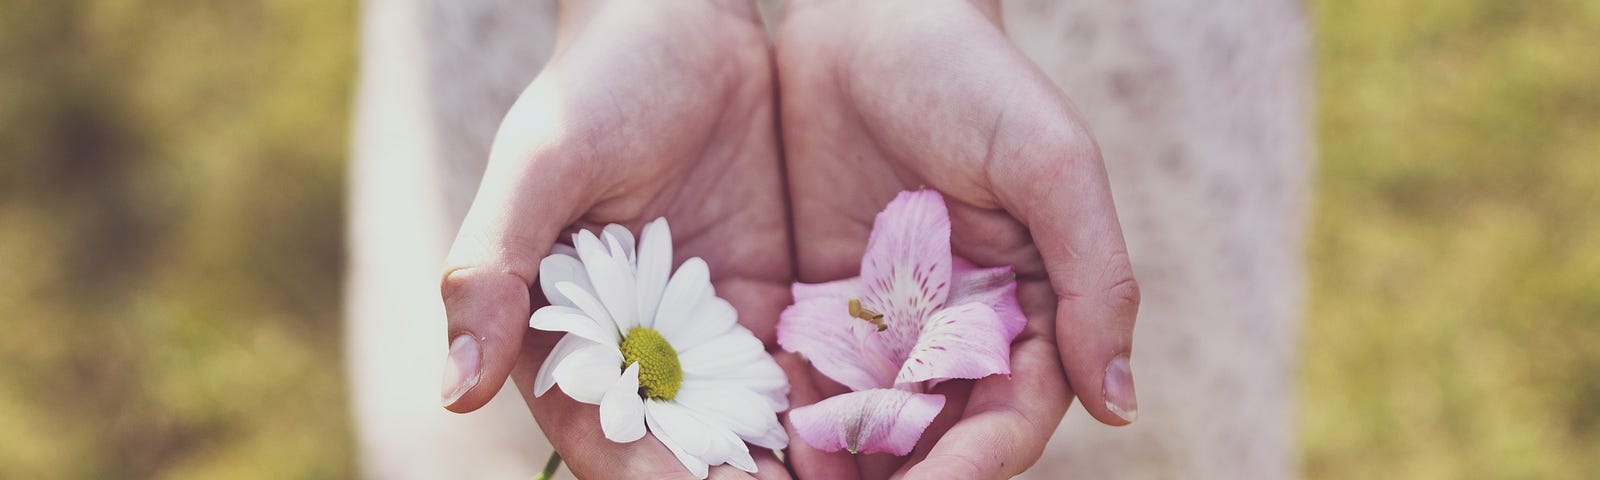 A young woman’s hands holding a couple of flowres